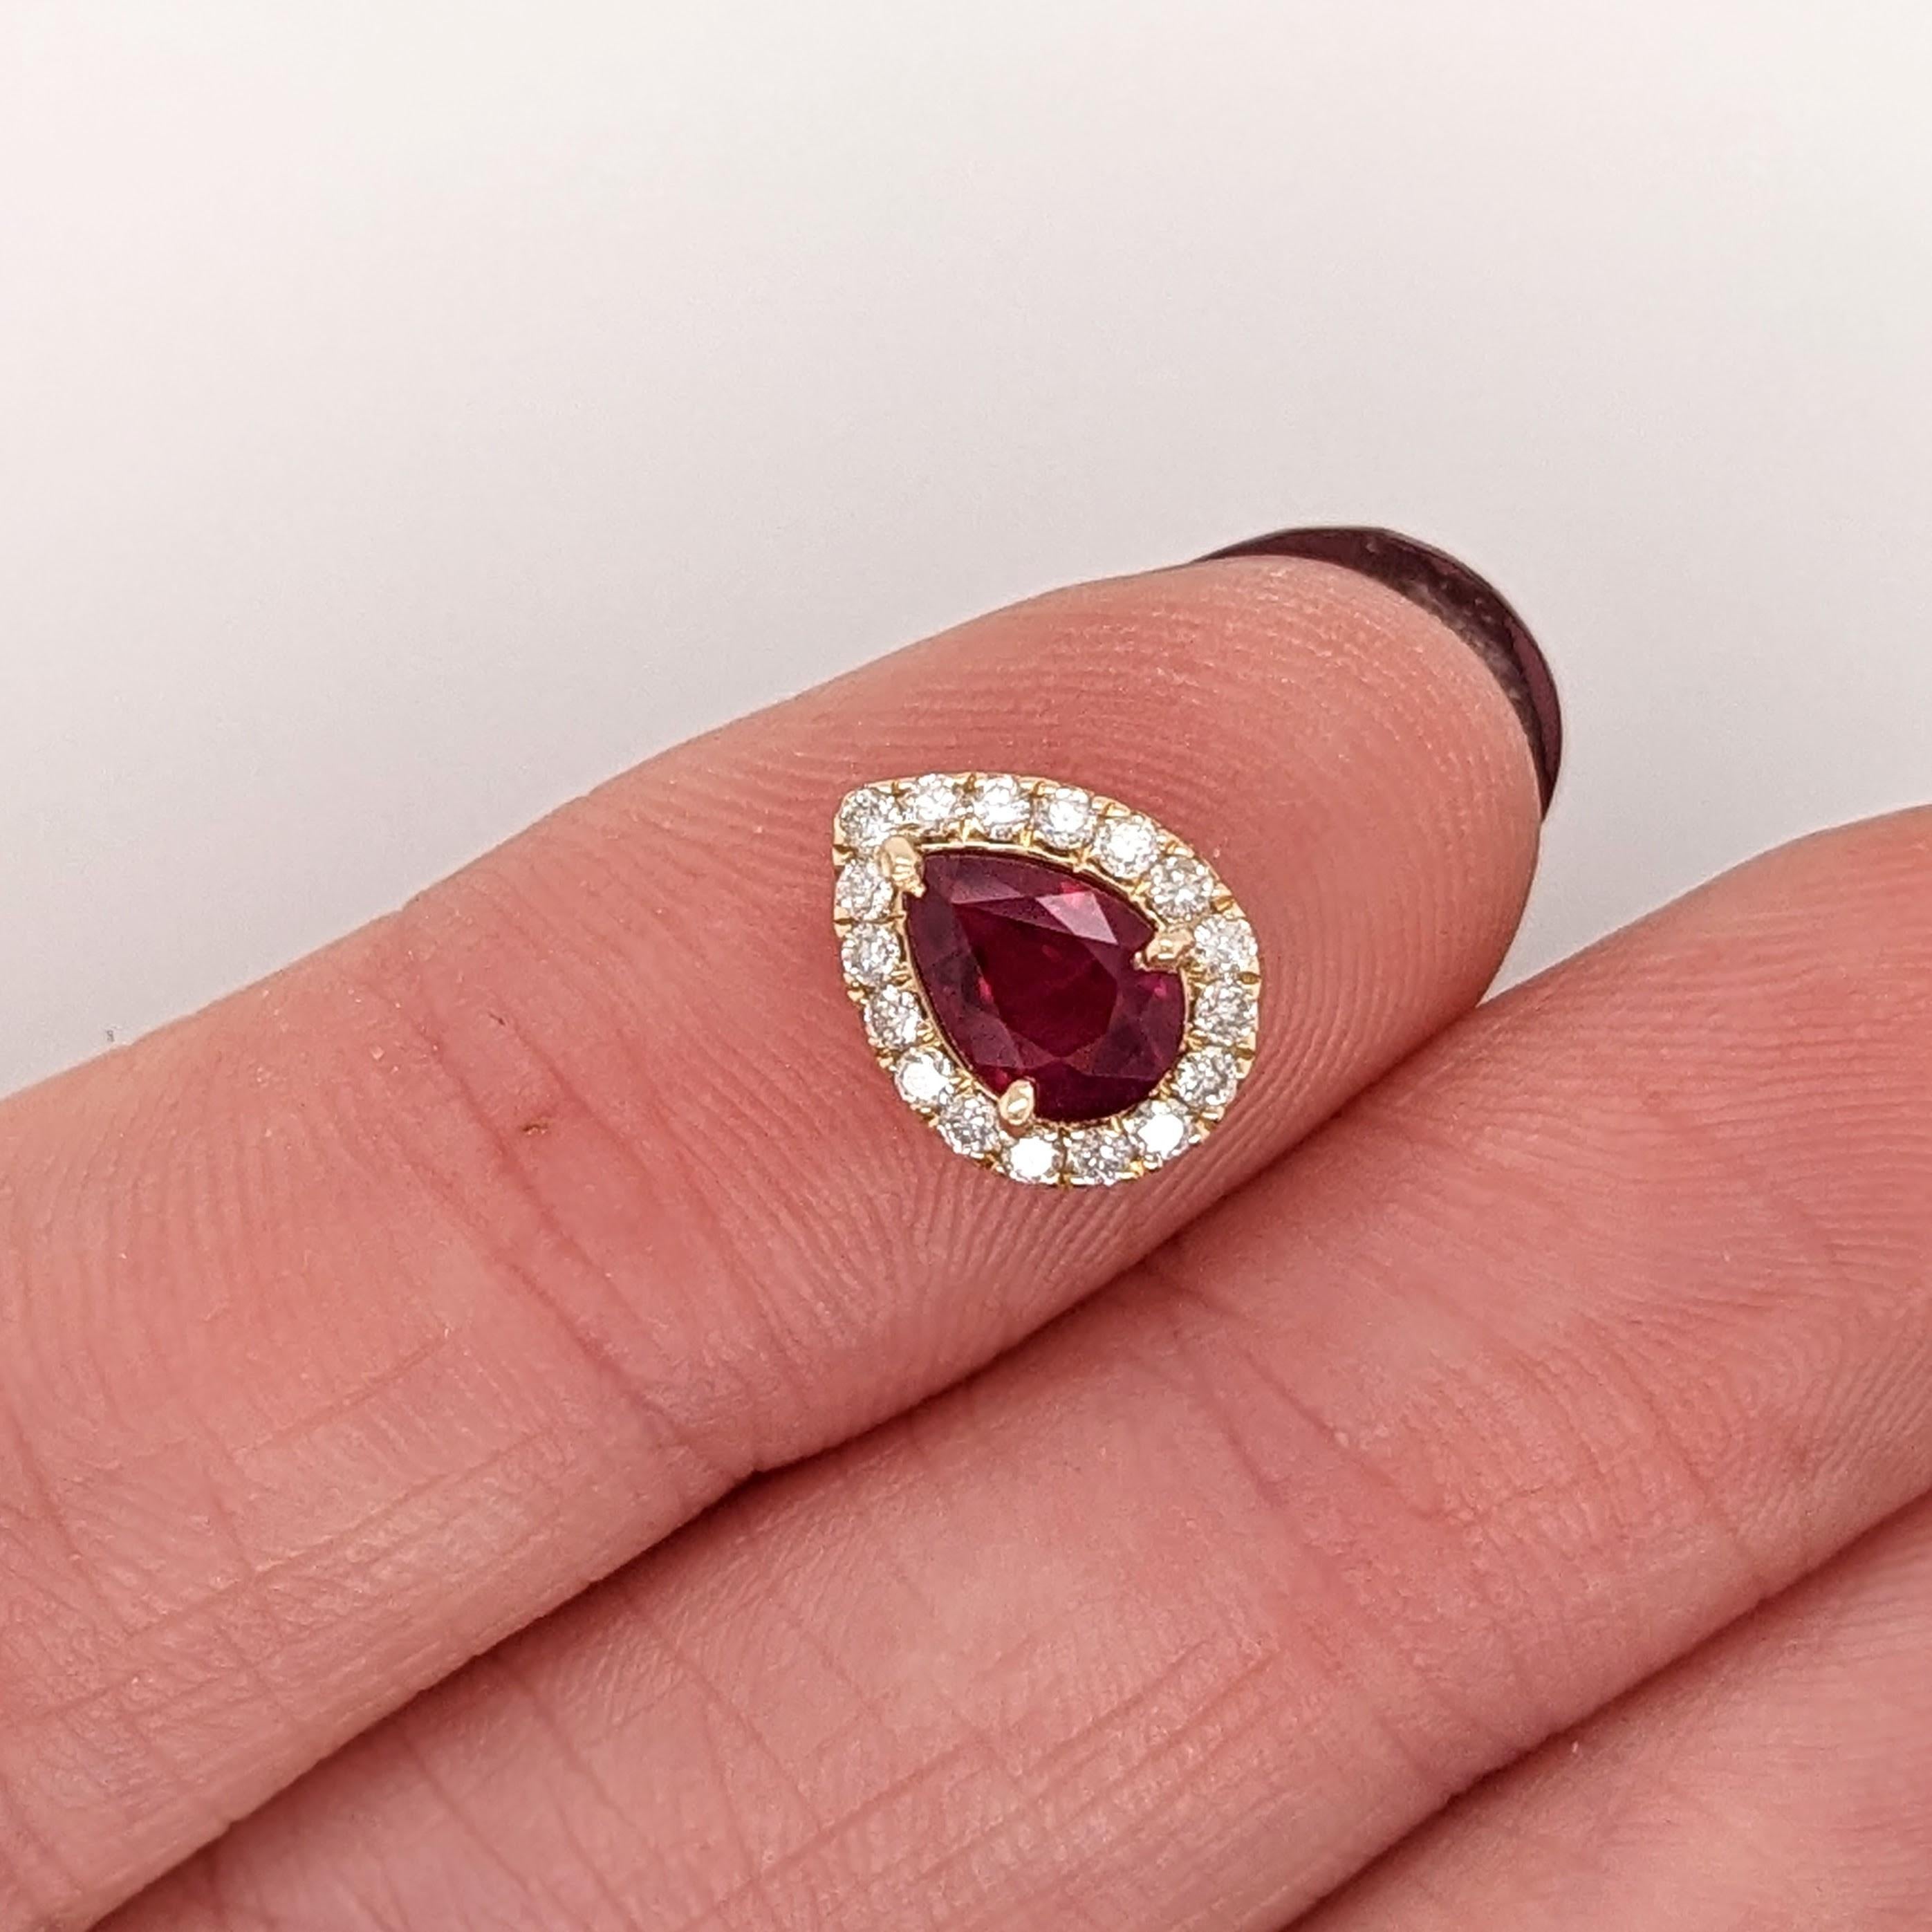 This beautiful pendant features a 0.72 carat pear cut ruby gemstone with natural earth mined diamonds all set in solid 14K gold. With its classic design and stunning July birthstone, this pendant is sure to brighten your look!

Specifications

Item